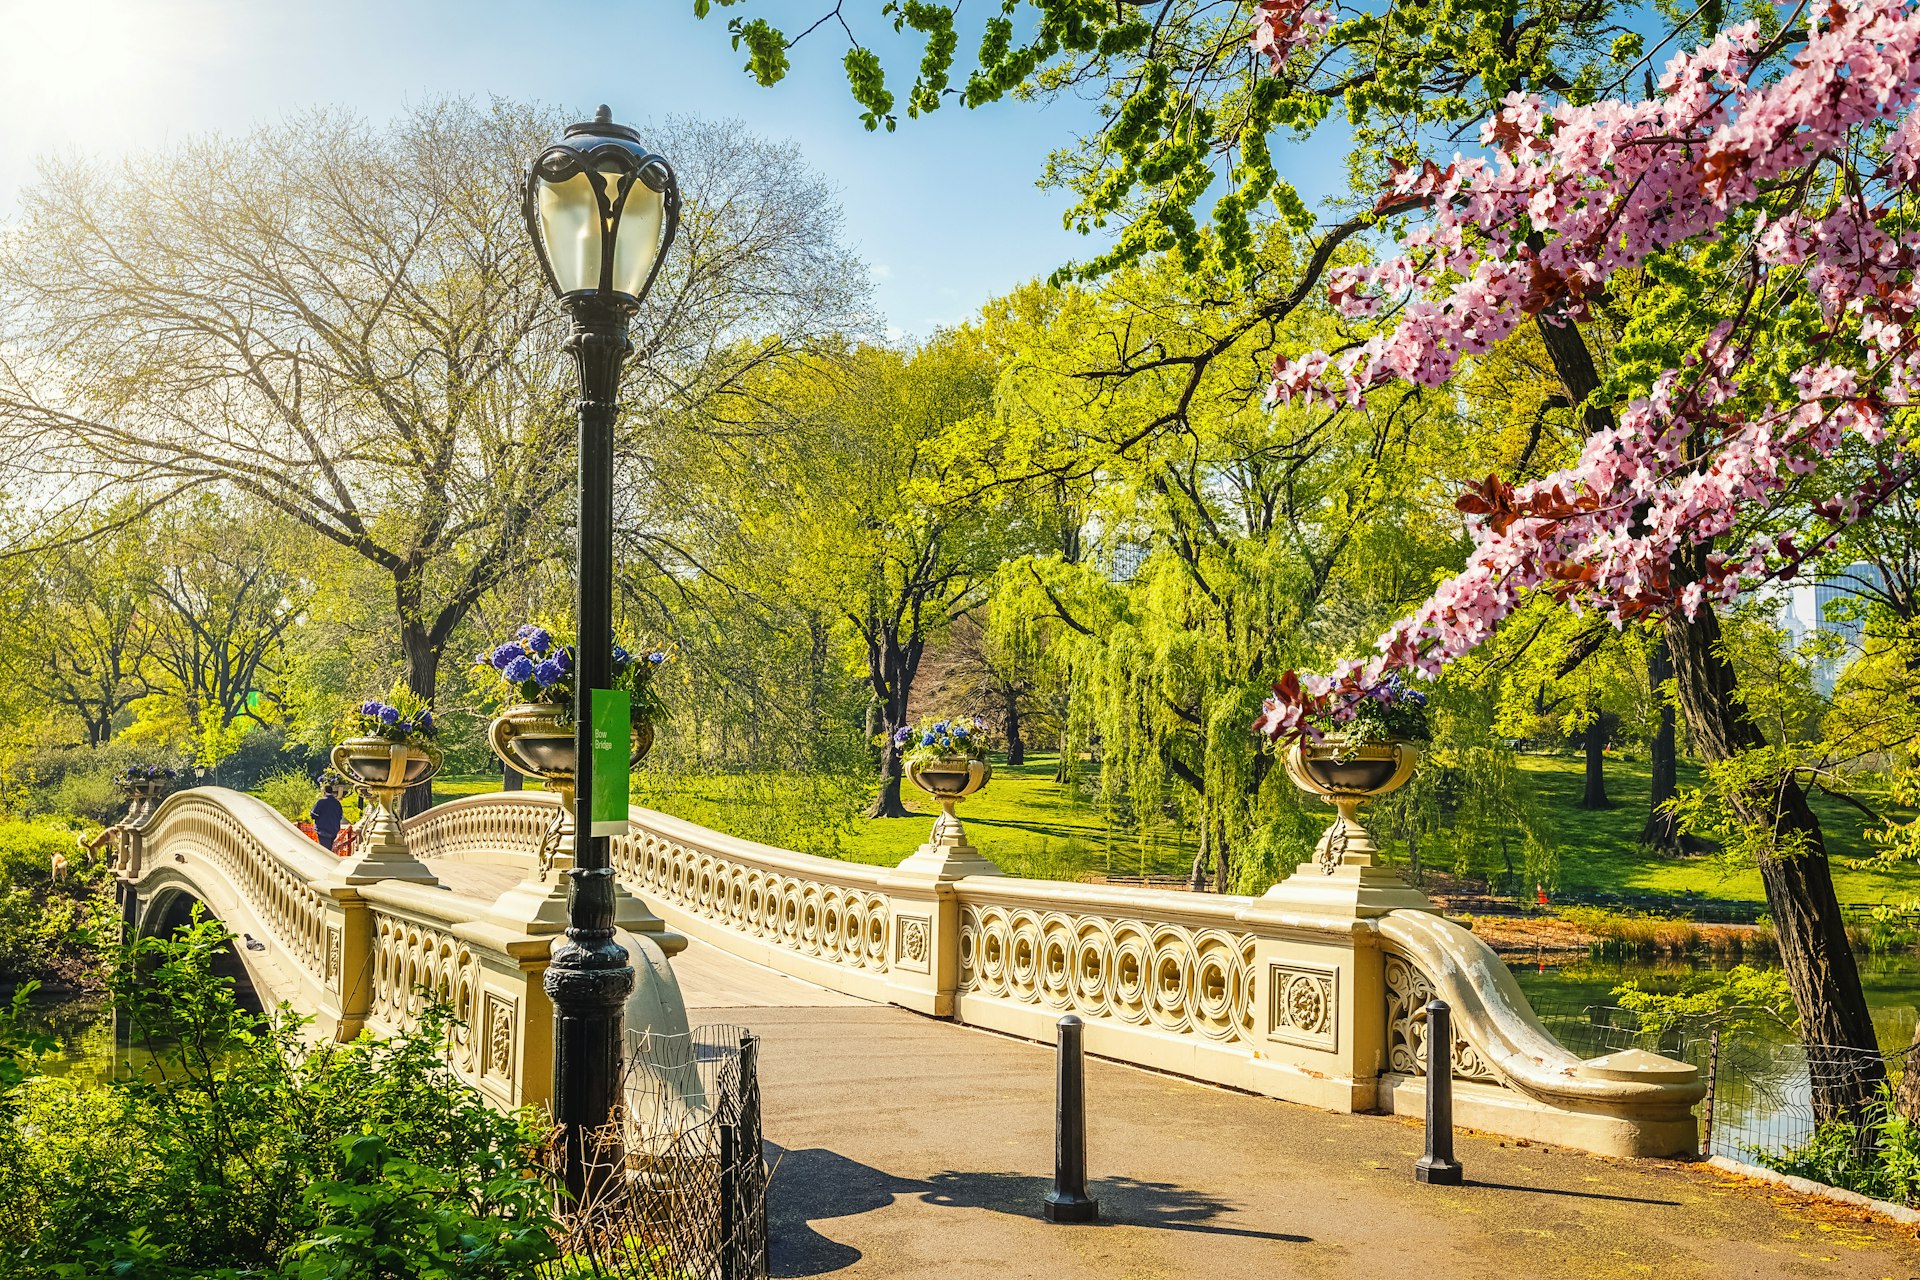 Bow bridge in Central Park on a sunny day in spring. A cherry blossom branch in full bloom frames the right side of the image